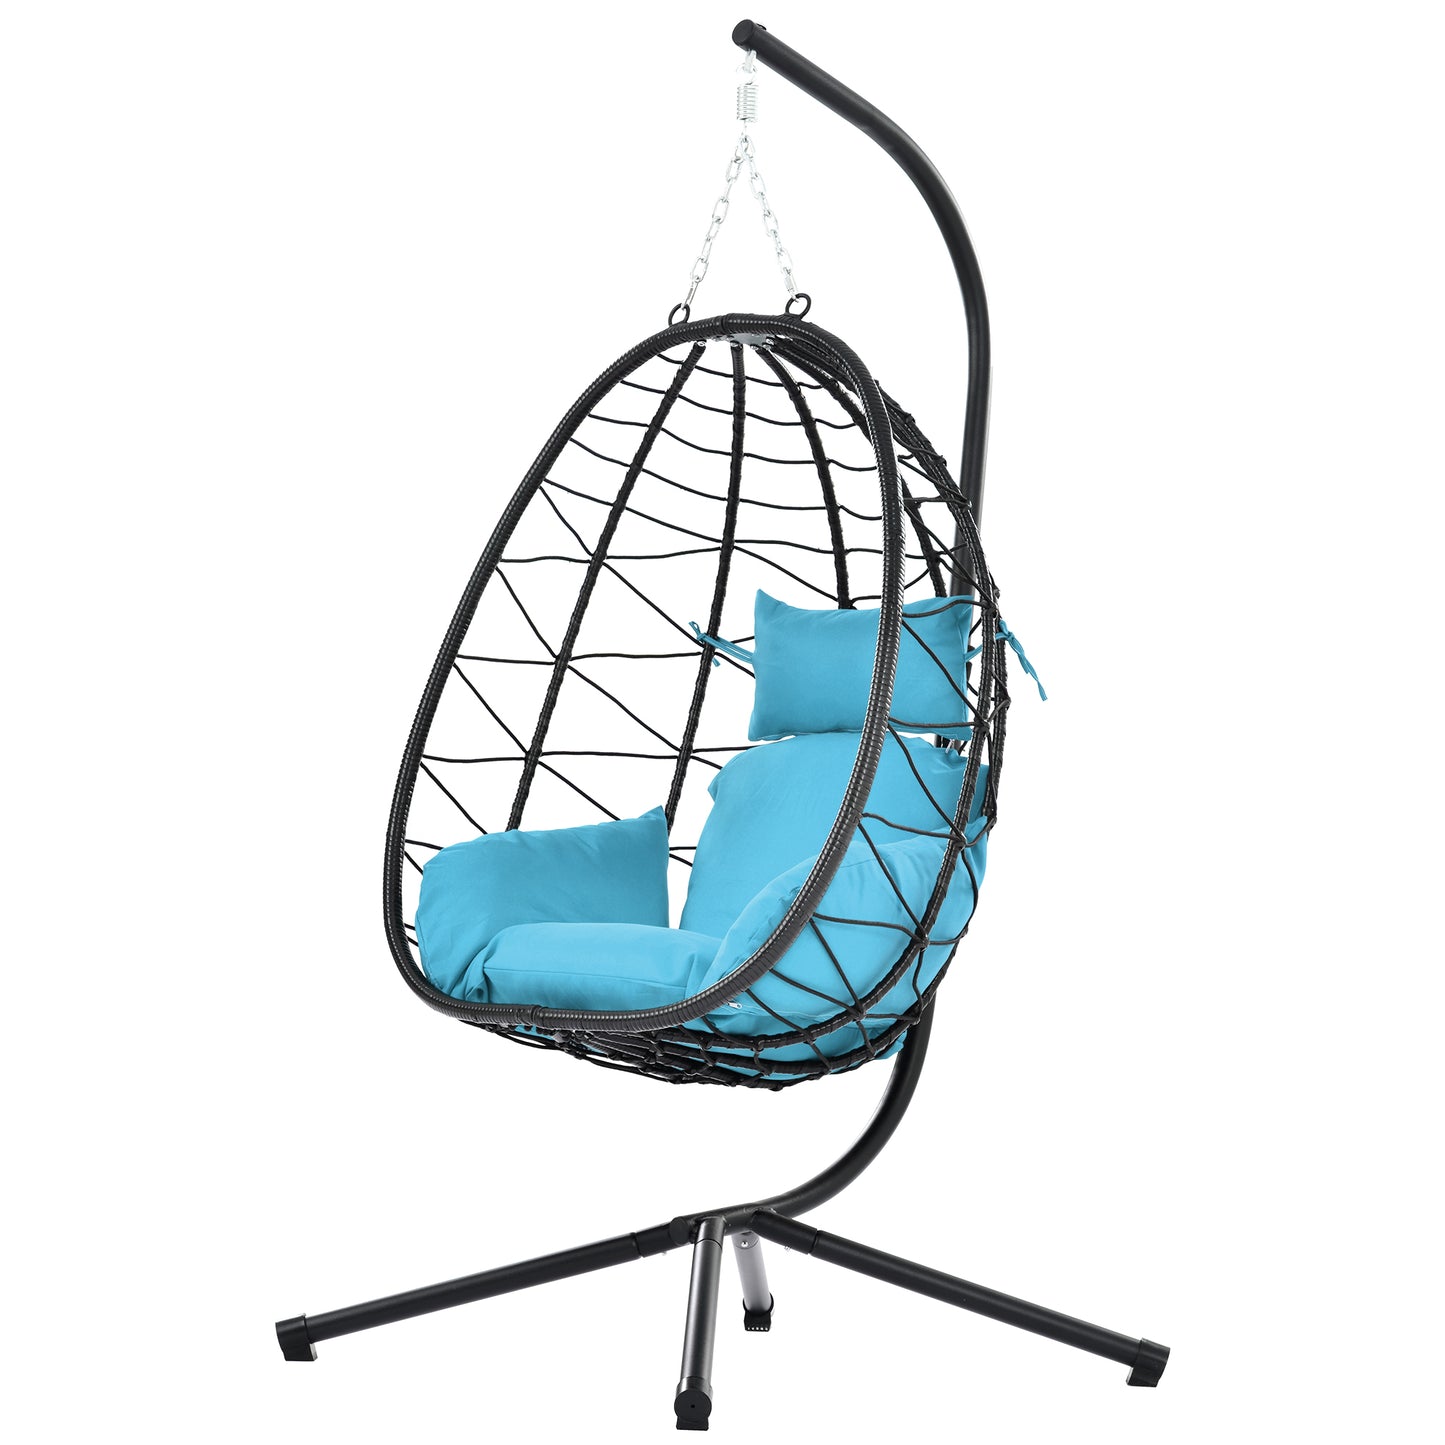 SYNGAR Hanging Egg Chair, Swing Chair with Steel Hammock Stand Set, Hammock Chair with Soft Seat Cushion, Multifunctional Hanging Chairs for Outdoor Indoor Bedroom, Light Blue